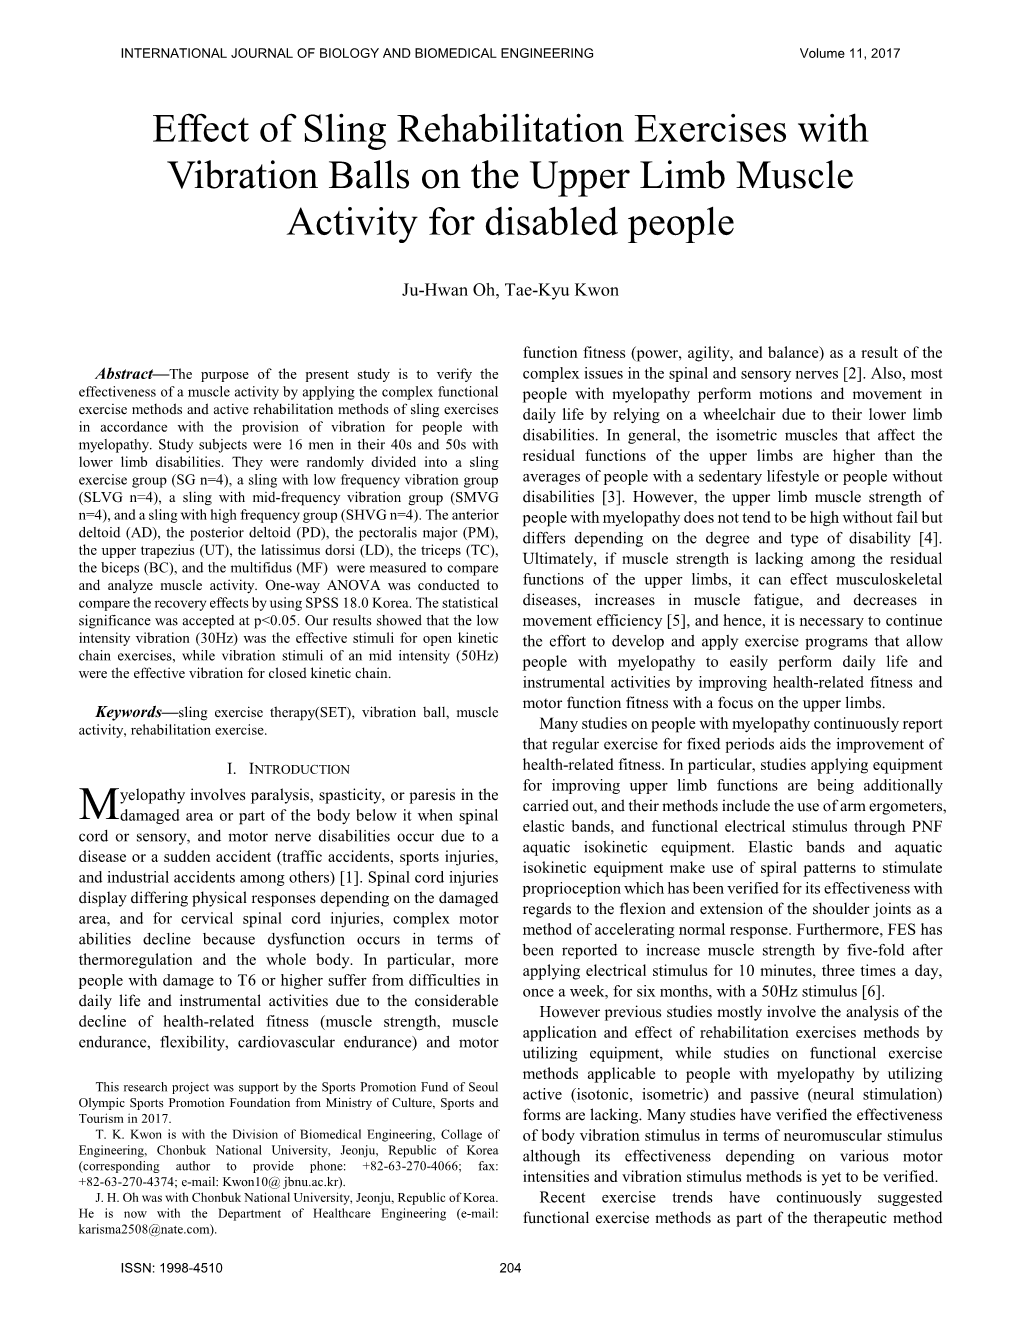 Effect of Sling Rehabilitation Exercises with Vibration Balls on the Upper Limb Muscle Activity for Disabled People